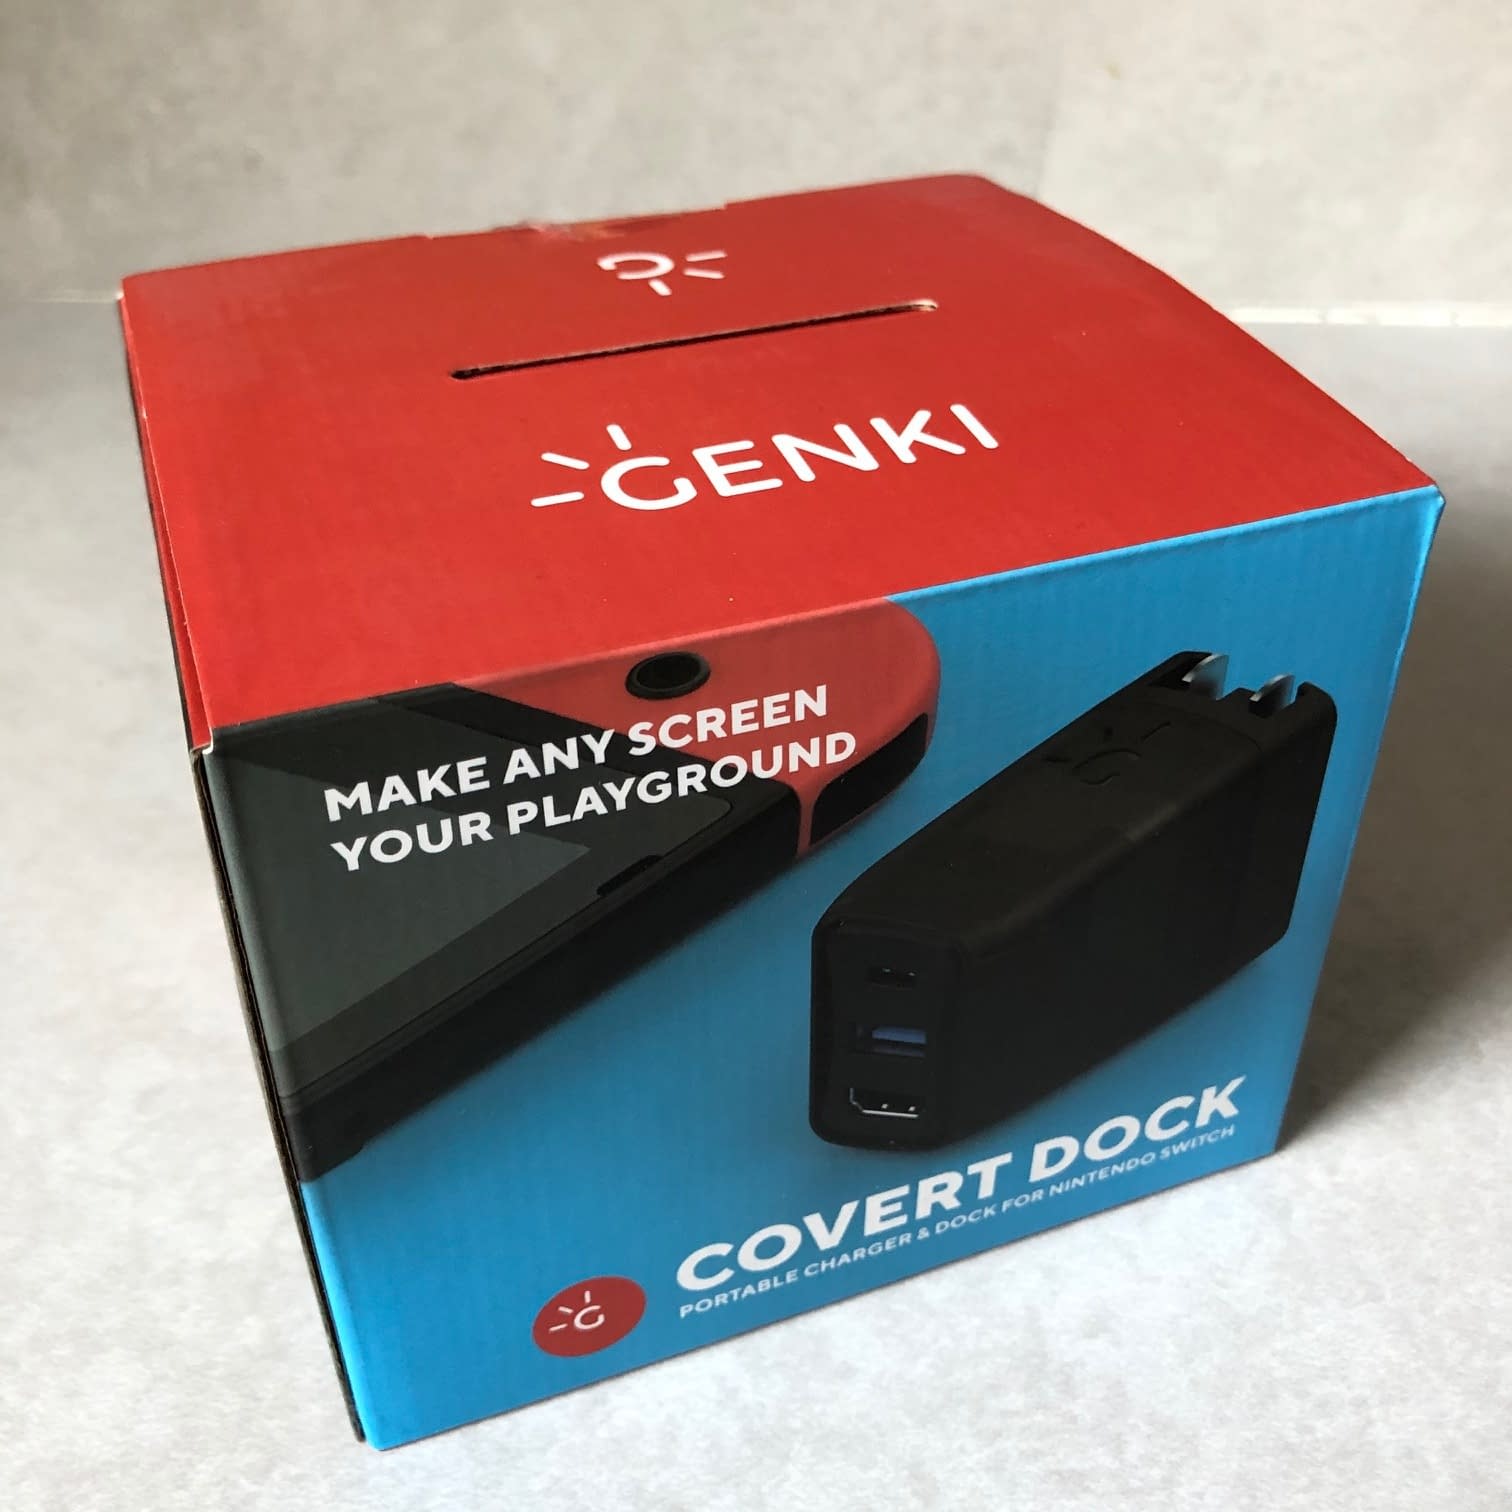 Genki Covert Dock Is a Must-Have Nintendo Switch Accessory